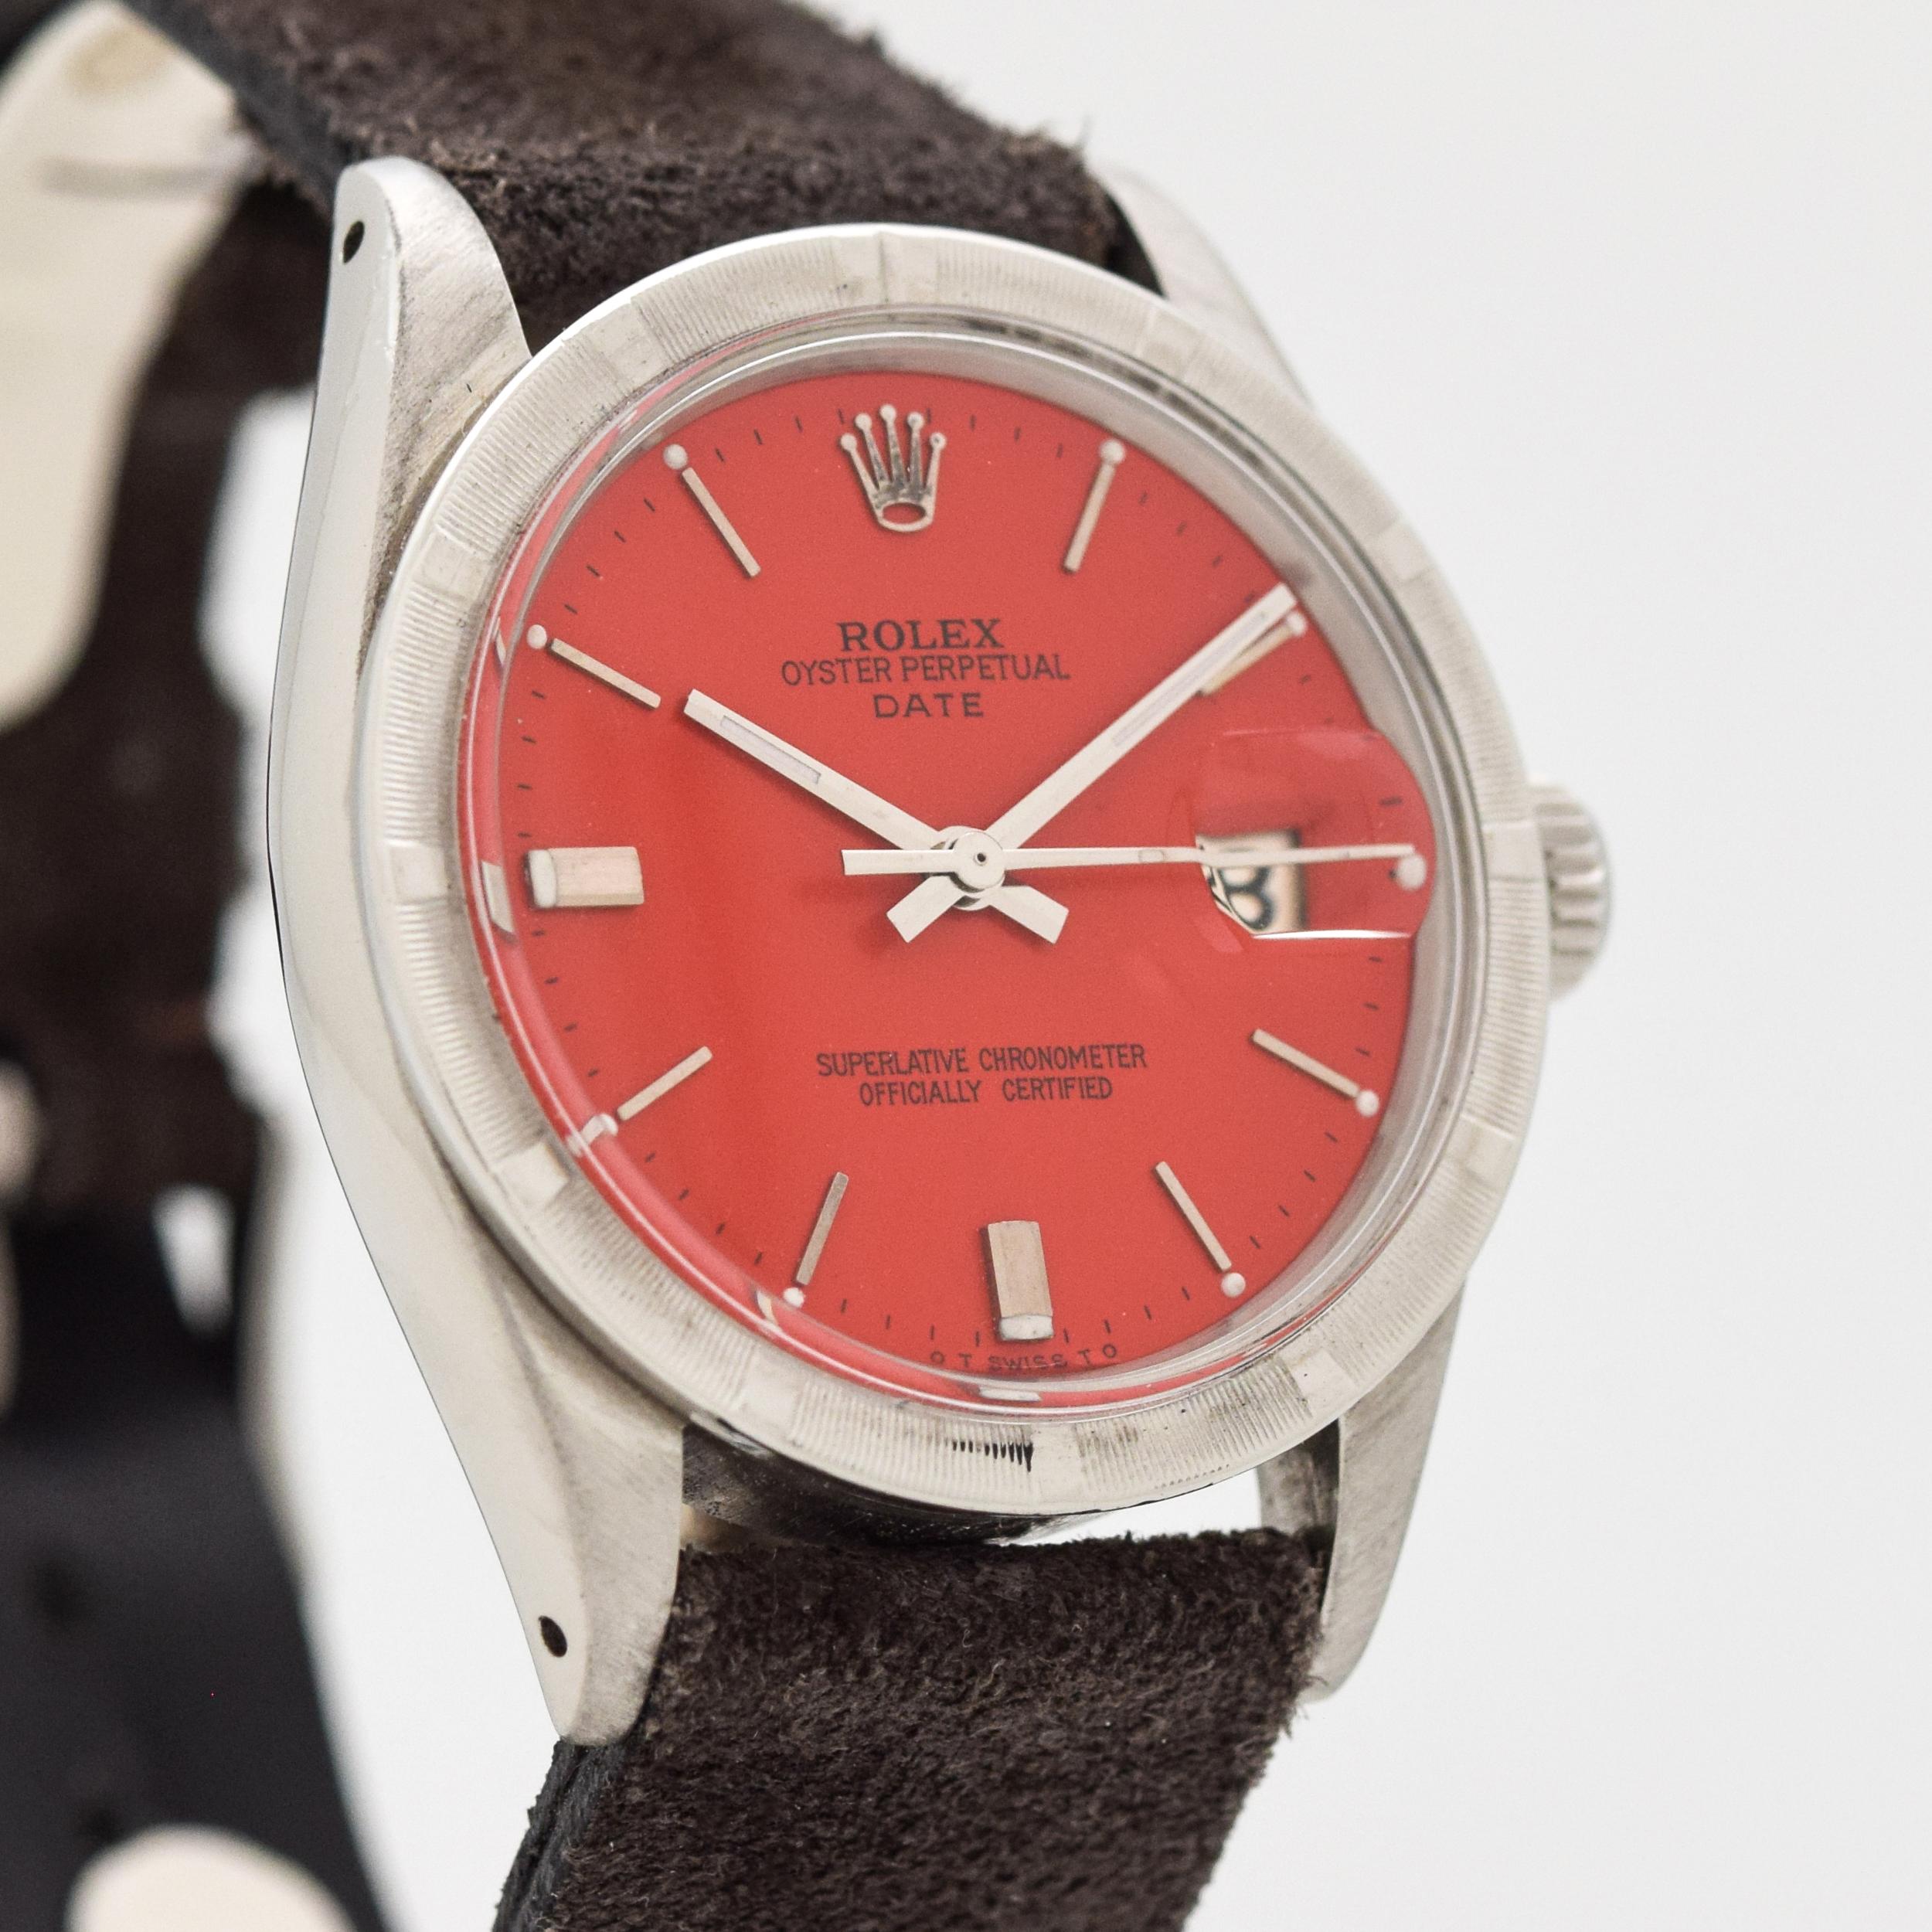 1964 Vintage Rolex Oyster Perpetual Date Ref. 1501 Stainless Steel watch with Machine Bezel with Custom Refinished Red Dial with Applied Steel Wide and Thin Steel Stick/Bar/Baton Markers. Case size, 35mm x 42mm lug to lug (1.38 in. x 1.65 in.) 